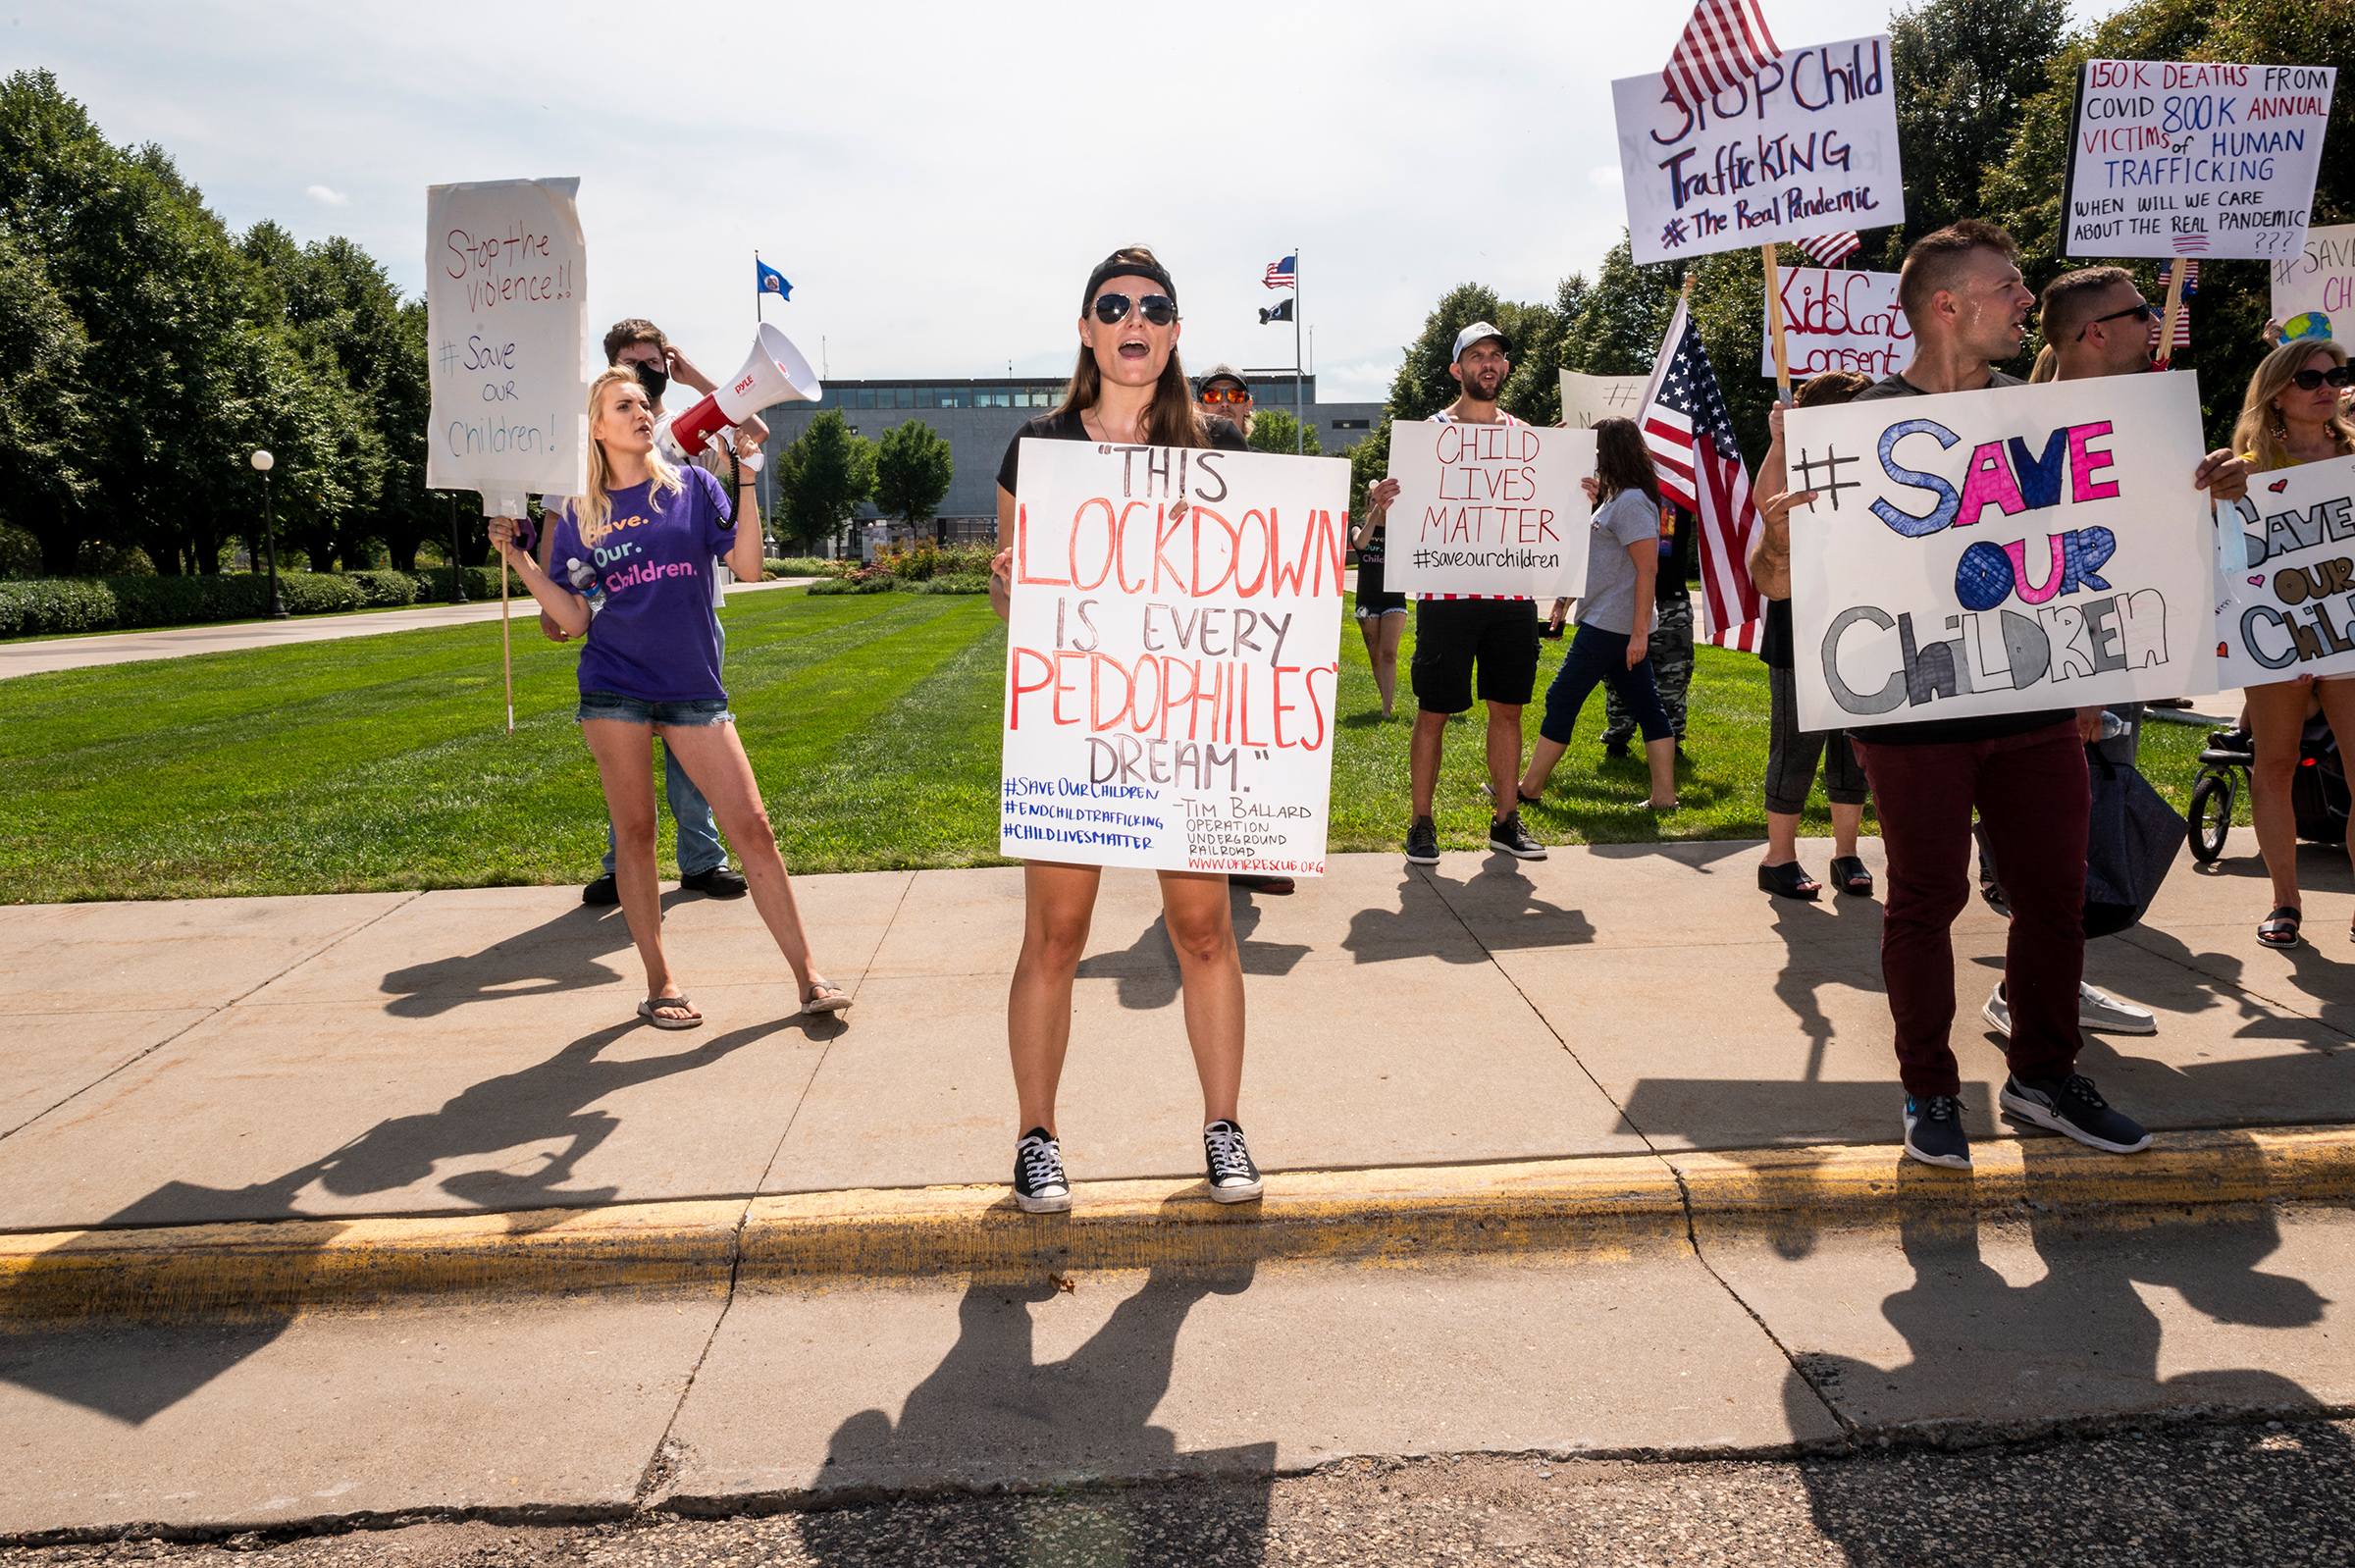 At an Aug. 22 “Save the Children” rally in St. Paul, Minn., protesters trumpet elements of the QAnon conspiracy theory (Stephen Maturen—Getty Images)